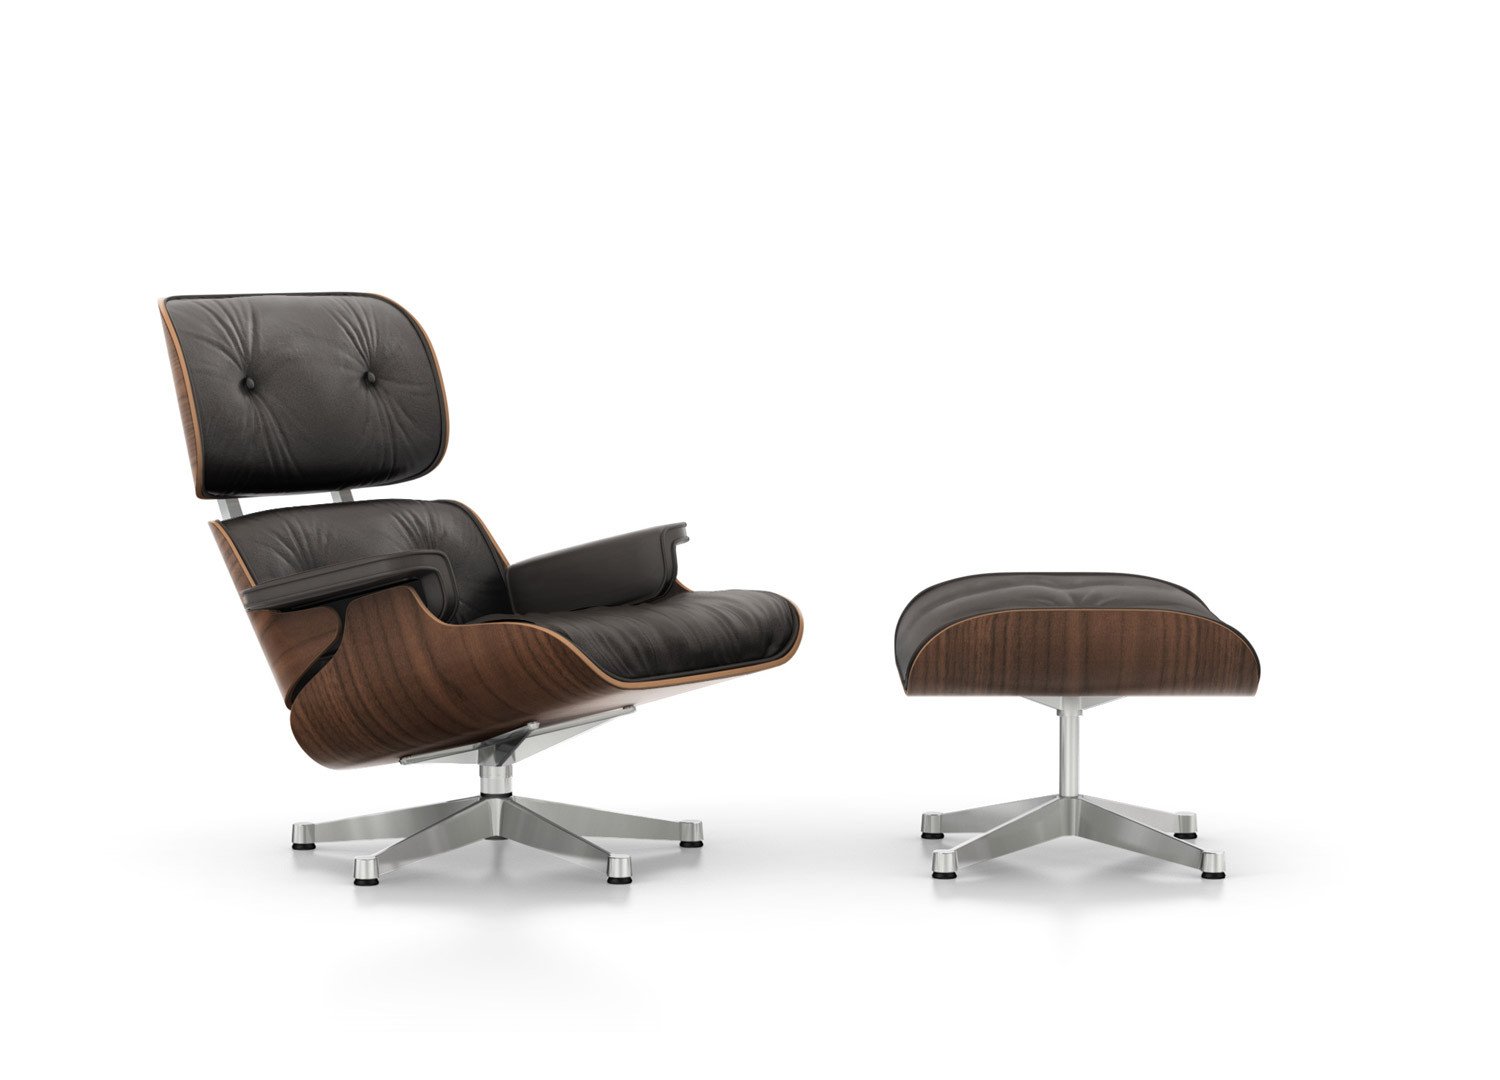 vitra_charles_ray_eames_lounge_chair_xl_walnut_black_pigmented_shell_brown_leather